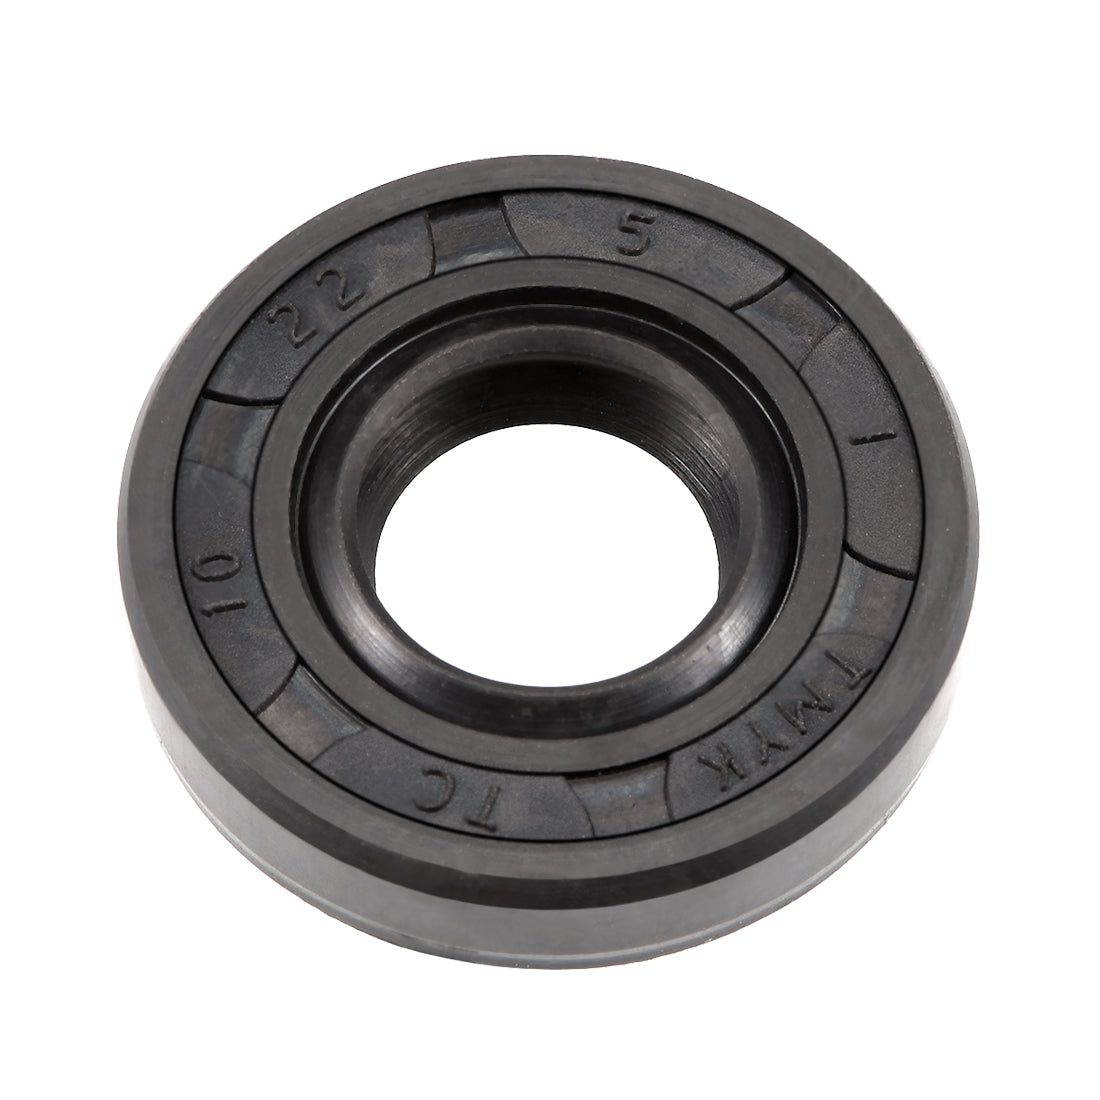 Uxcell Uxcell Oil Seal, TC 14mm x 28mm x 7mm, Nitrile Rubber Cover Double Lip